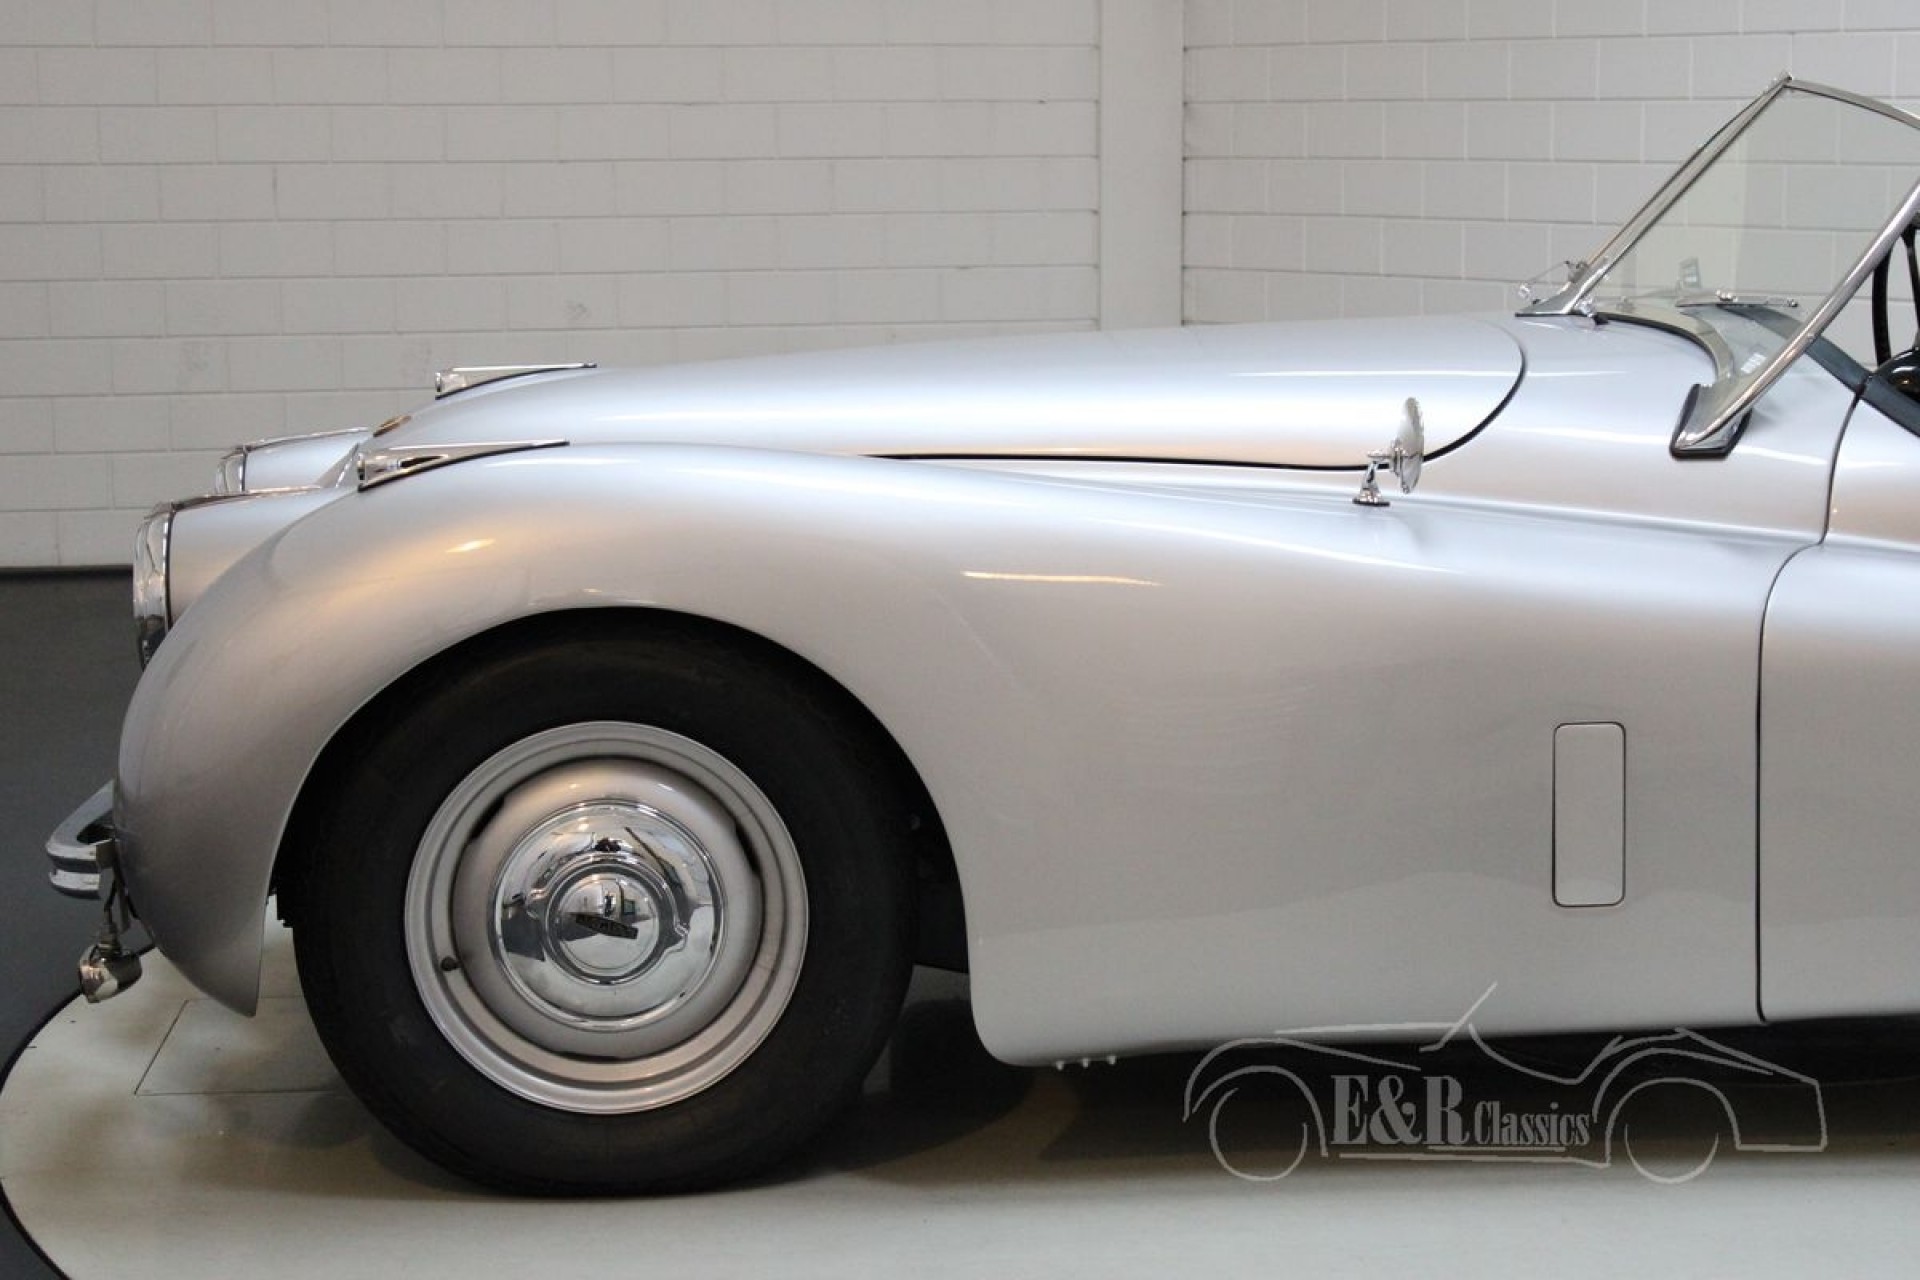 Jaguar Xk120 Roadster Very Good Condition 1951 For Sale At